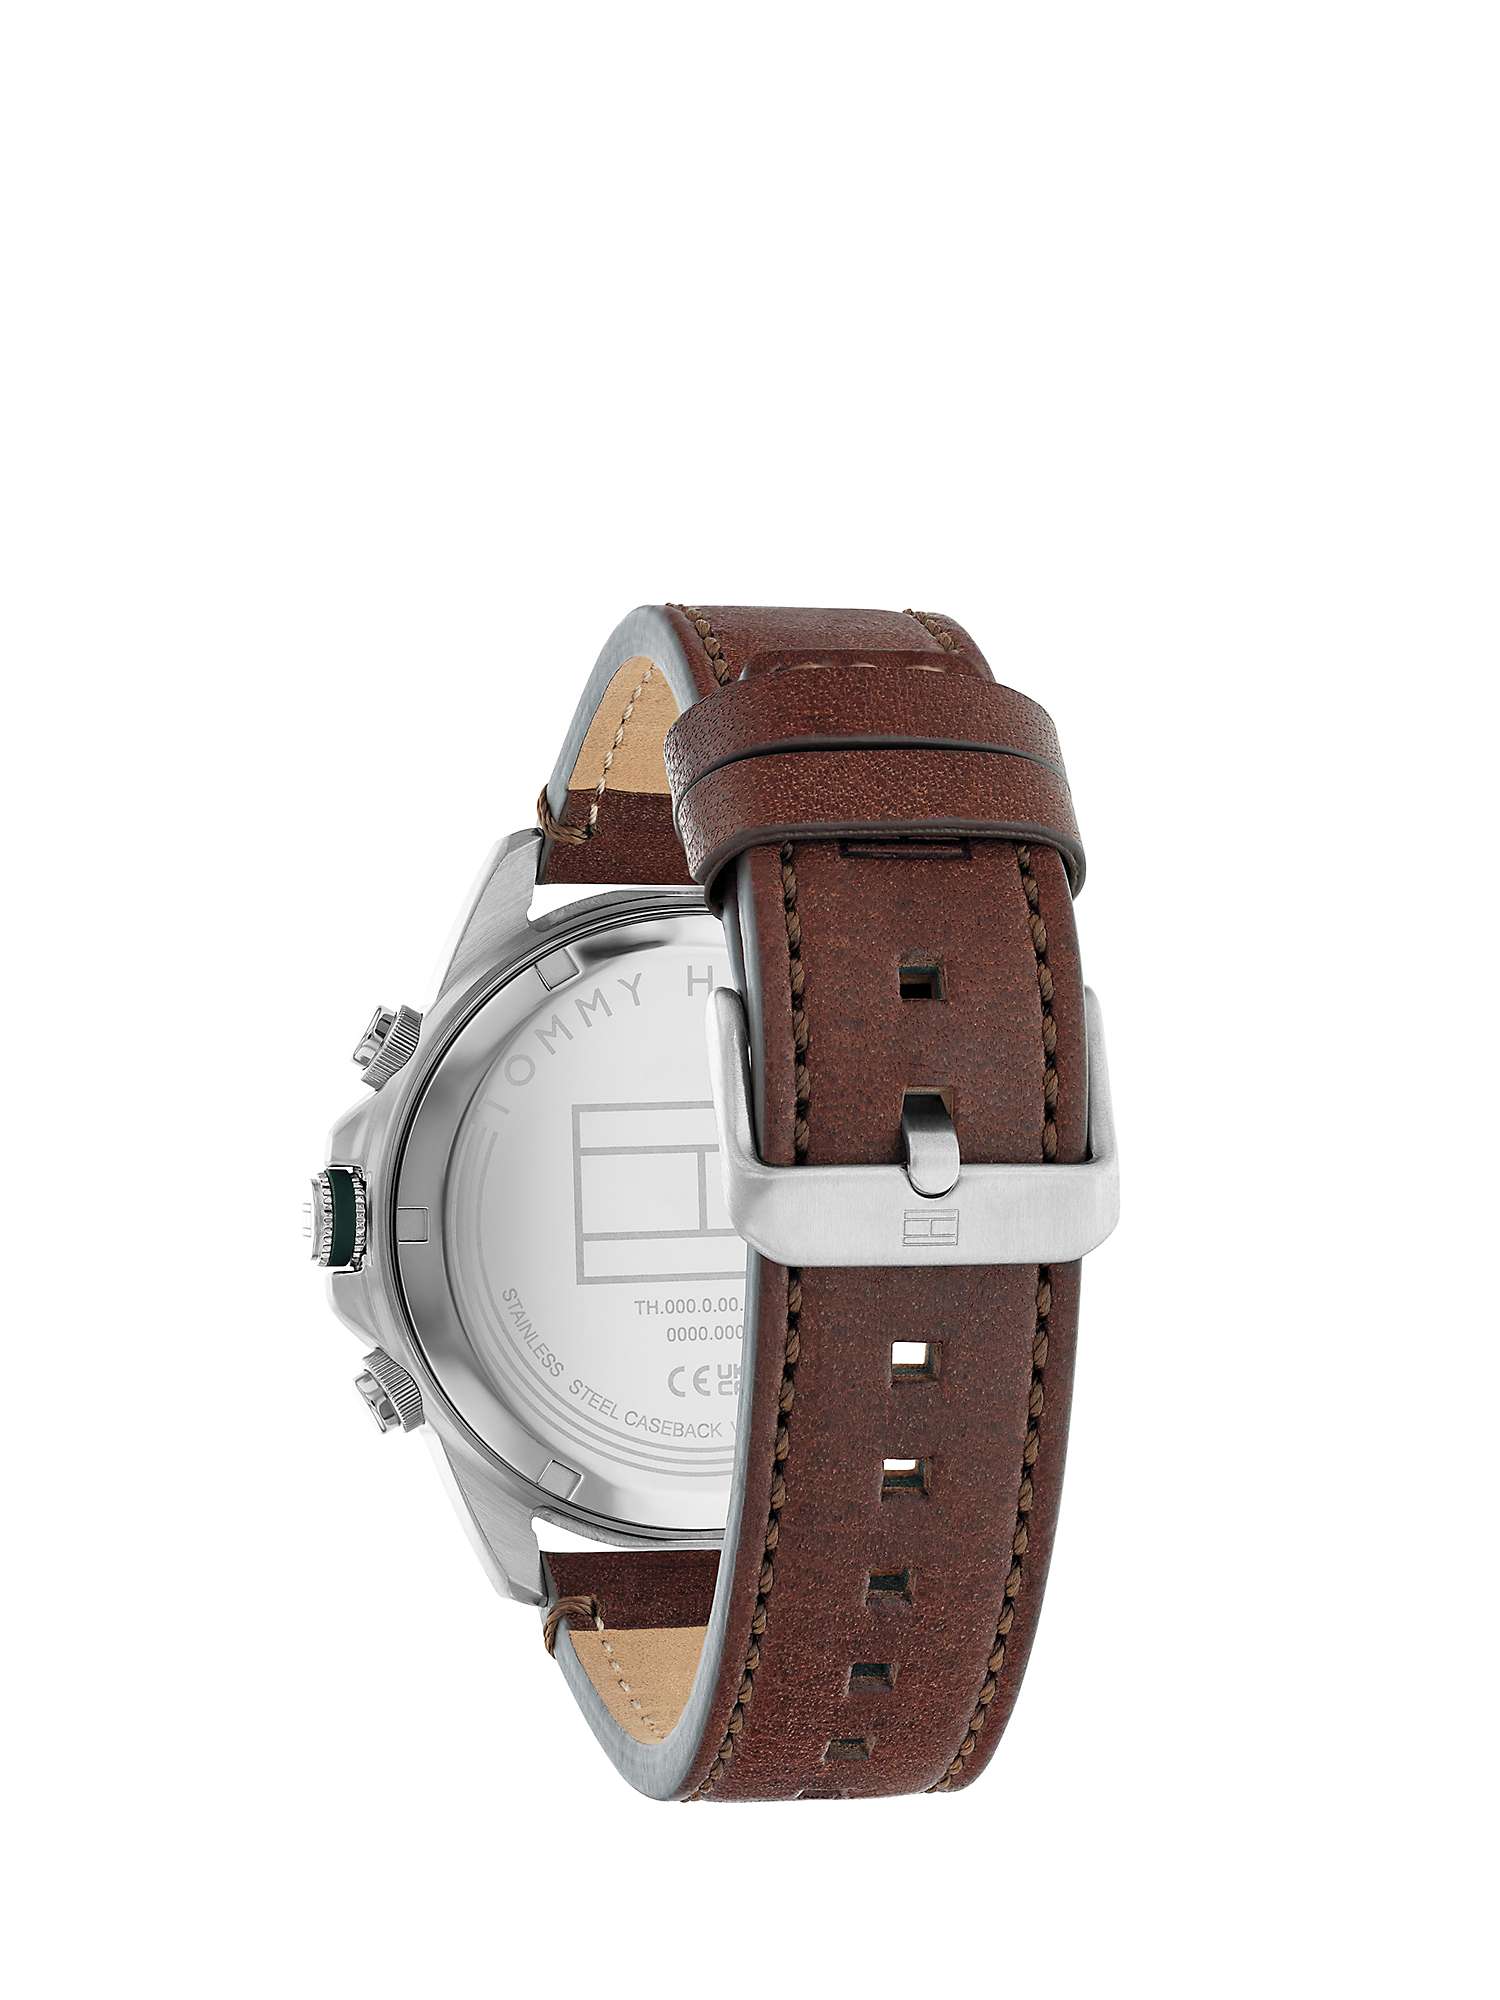 Buy Tommy Hilfiger Men's Lars Chronograph Leather Strap Watch, Brown/Green/Silver 1792064 Online at johnlewis.com